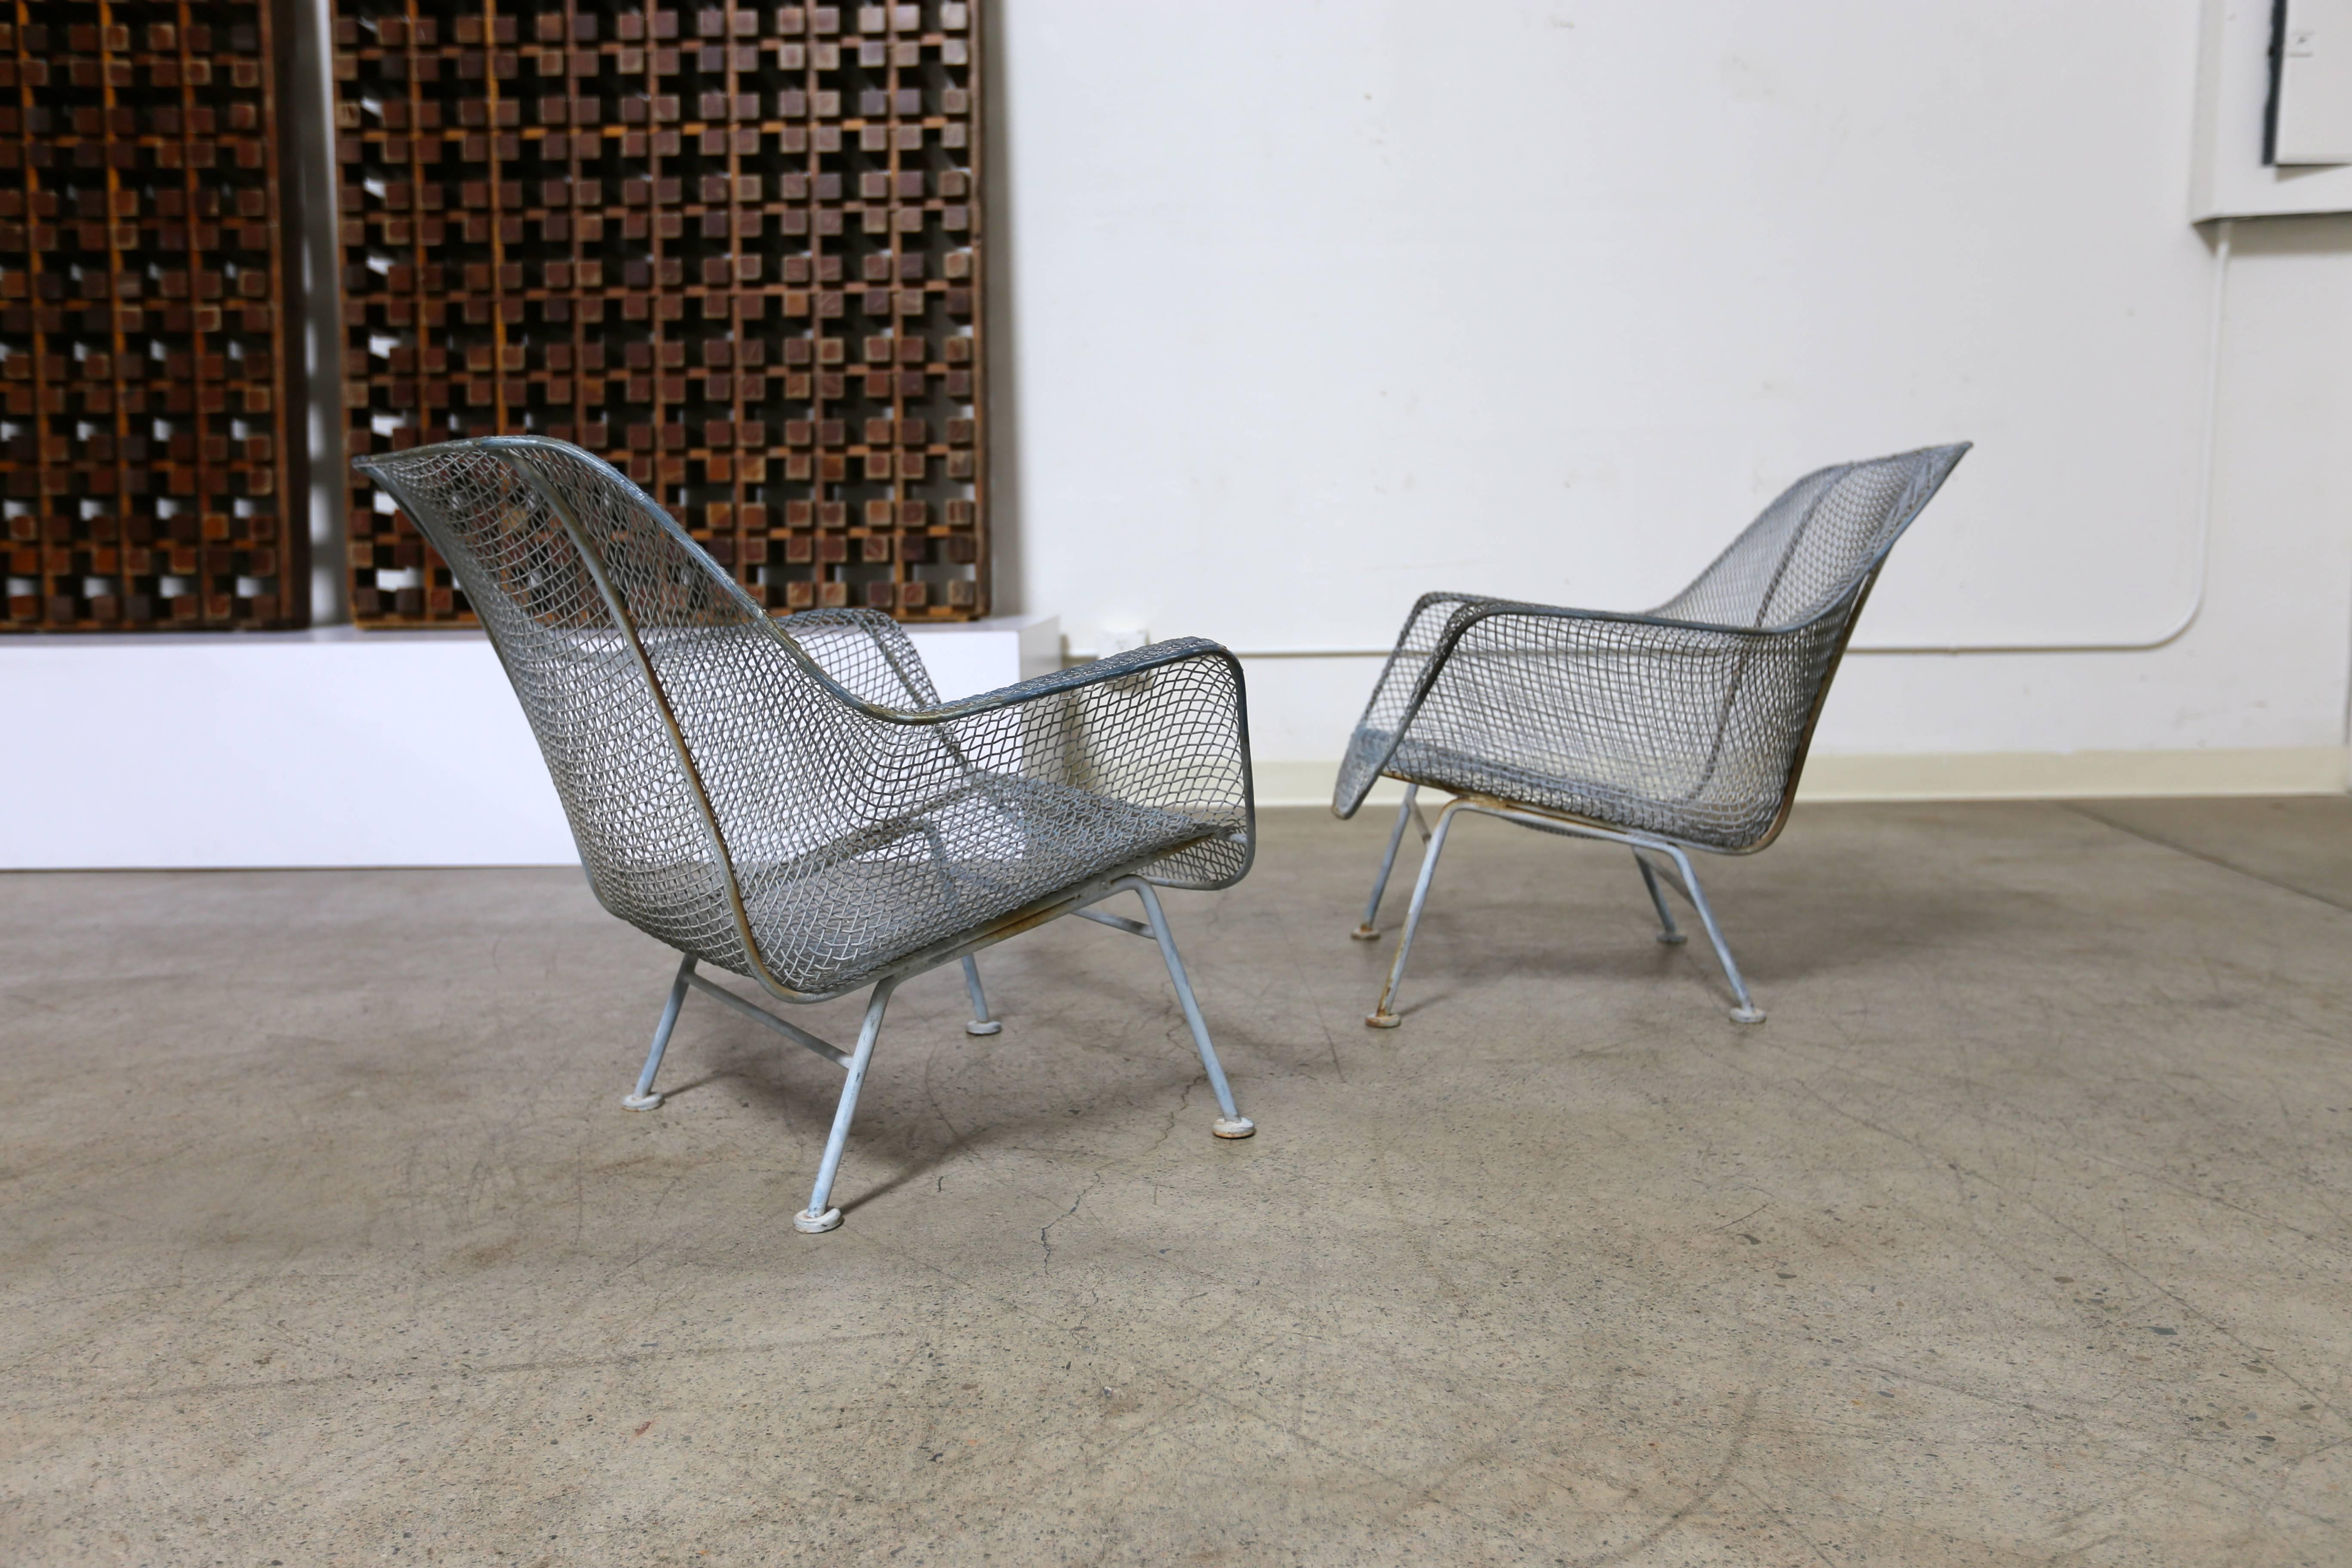 Pair of "Sculptra" lounge chairs by Russell Woodard.